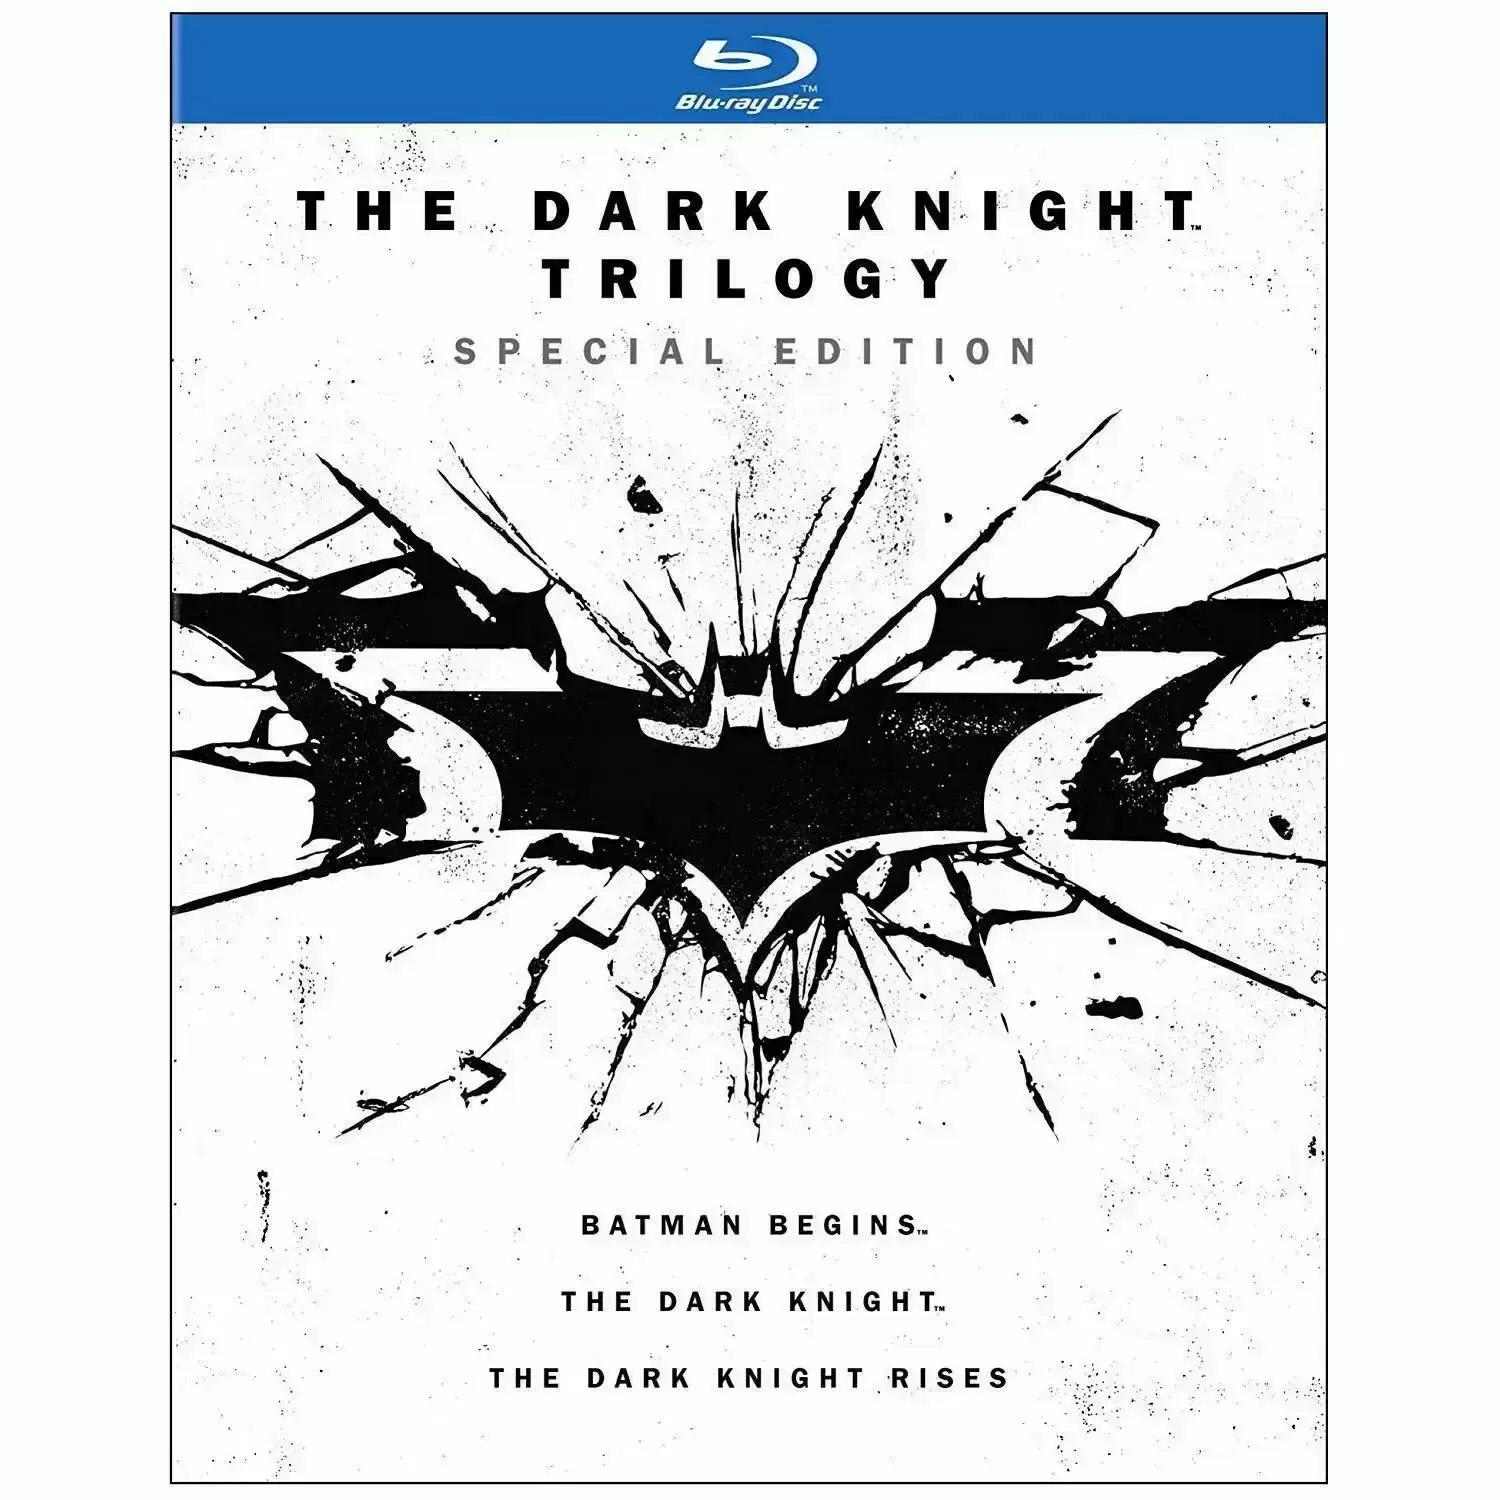 The Dark Knight Trilogy Special Edition Blu-ray for $12.96